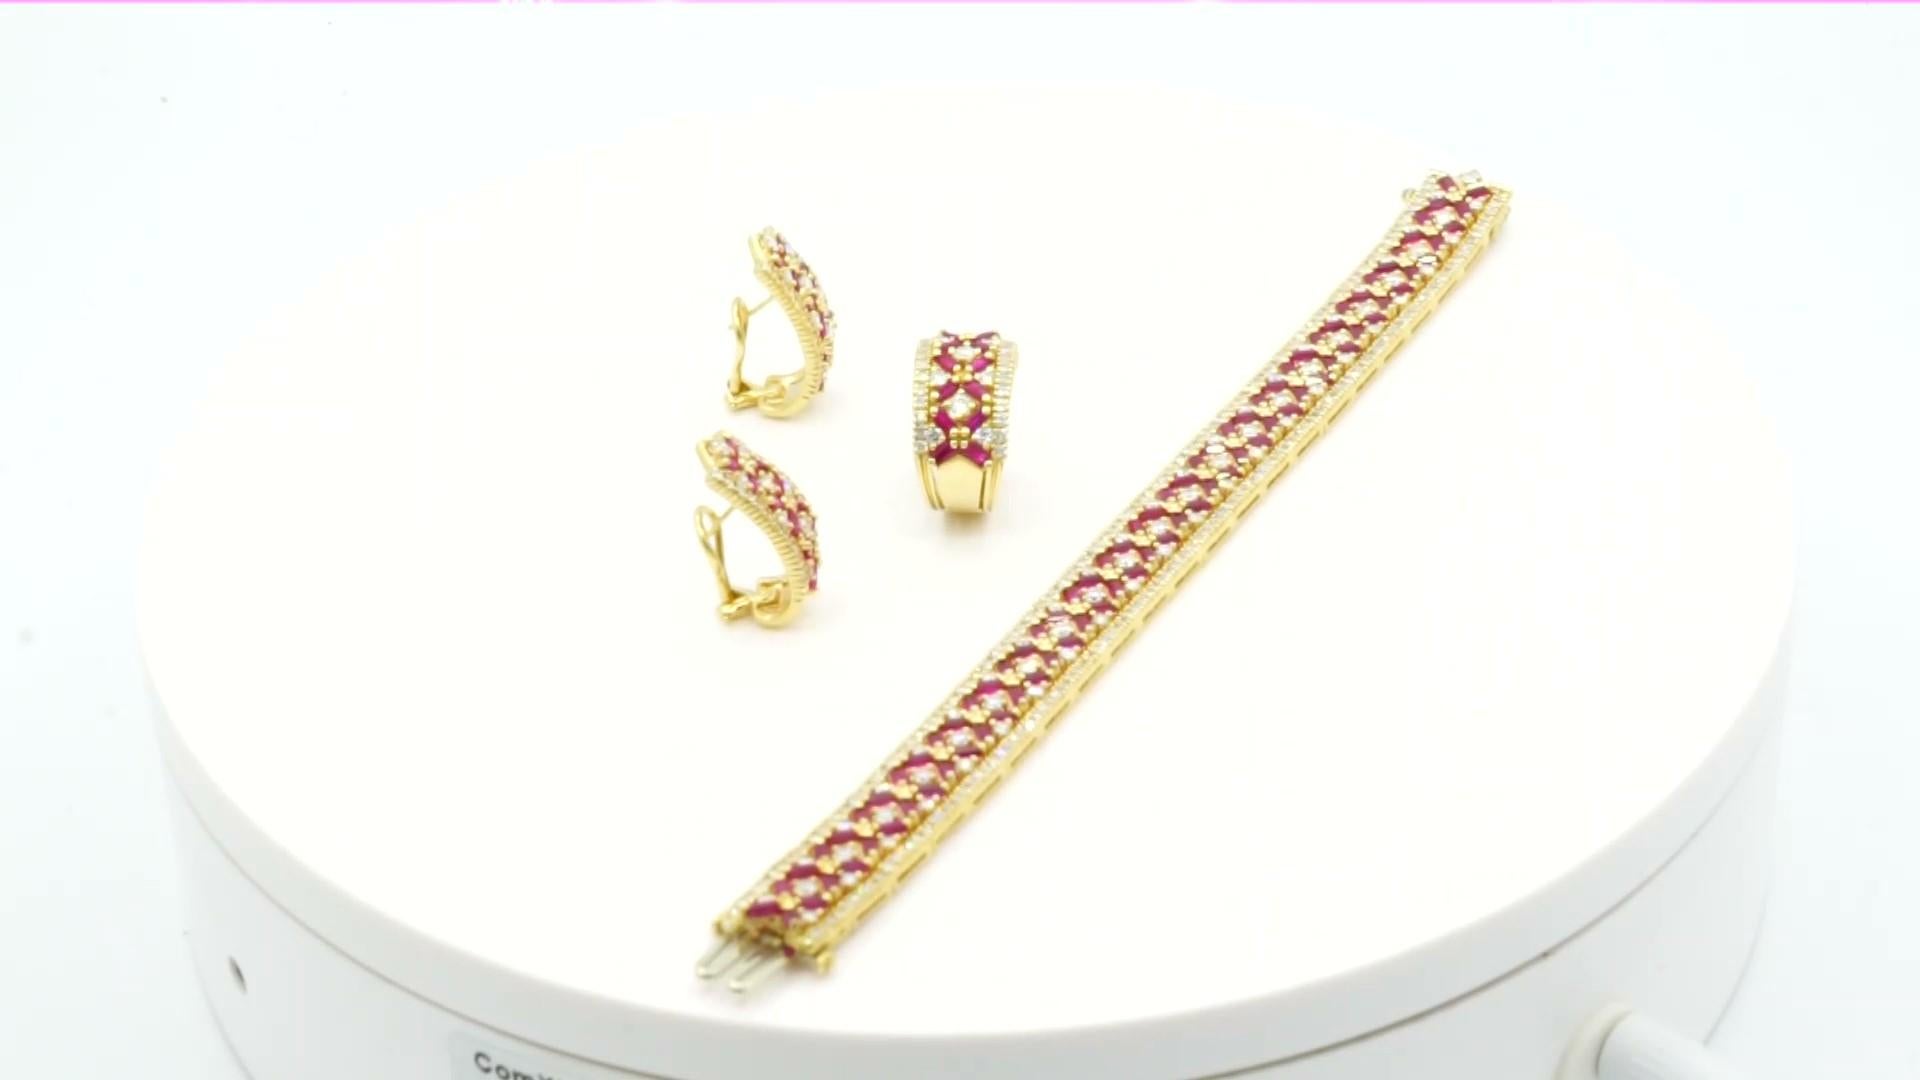 Contemporary 14 Karat Yellow Gold Ruby and Diamond Trio Set Ring, Earrings and Bracelet Set